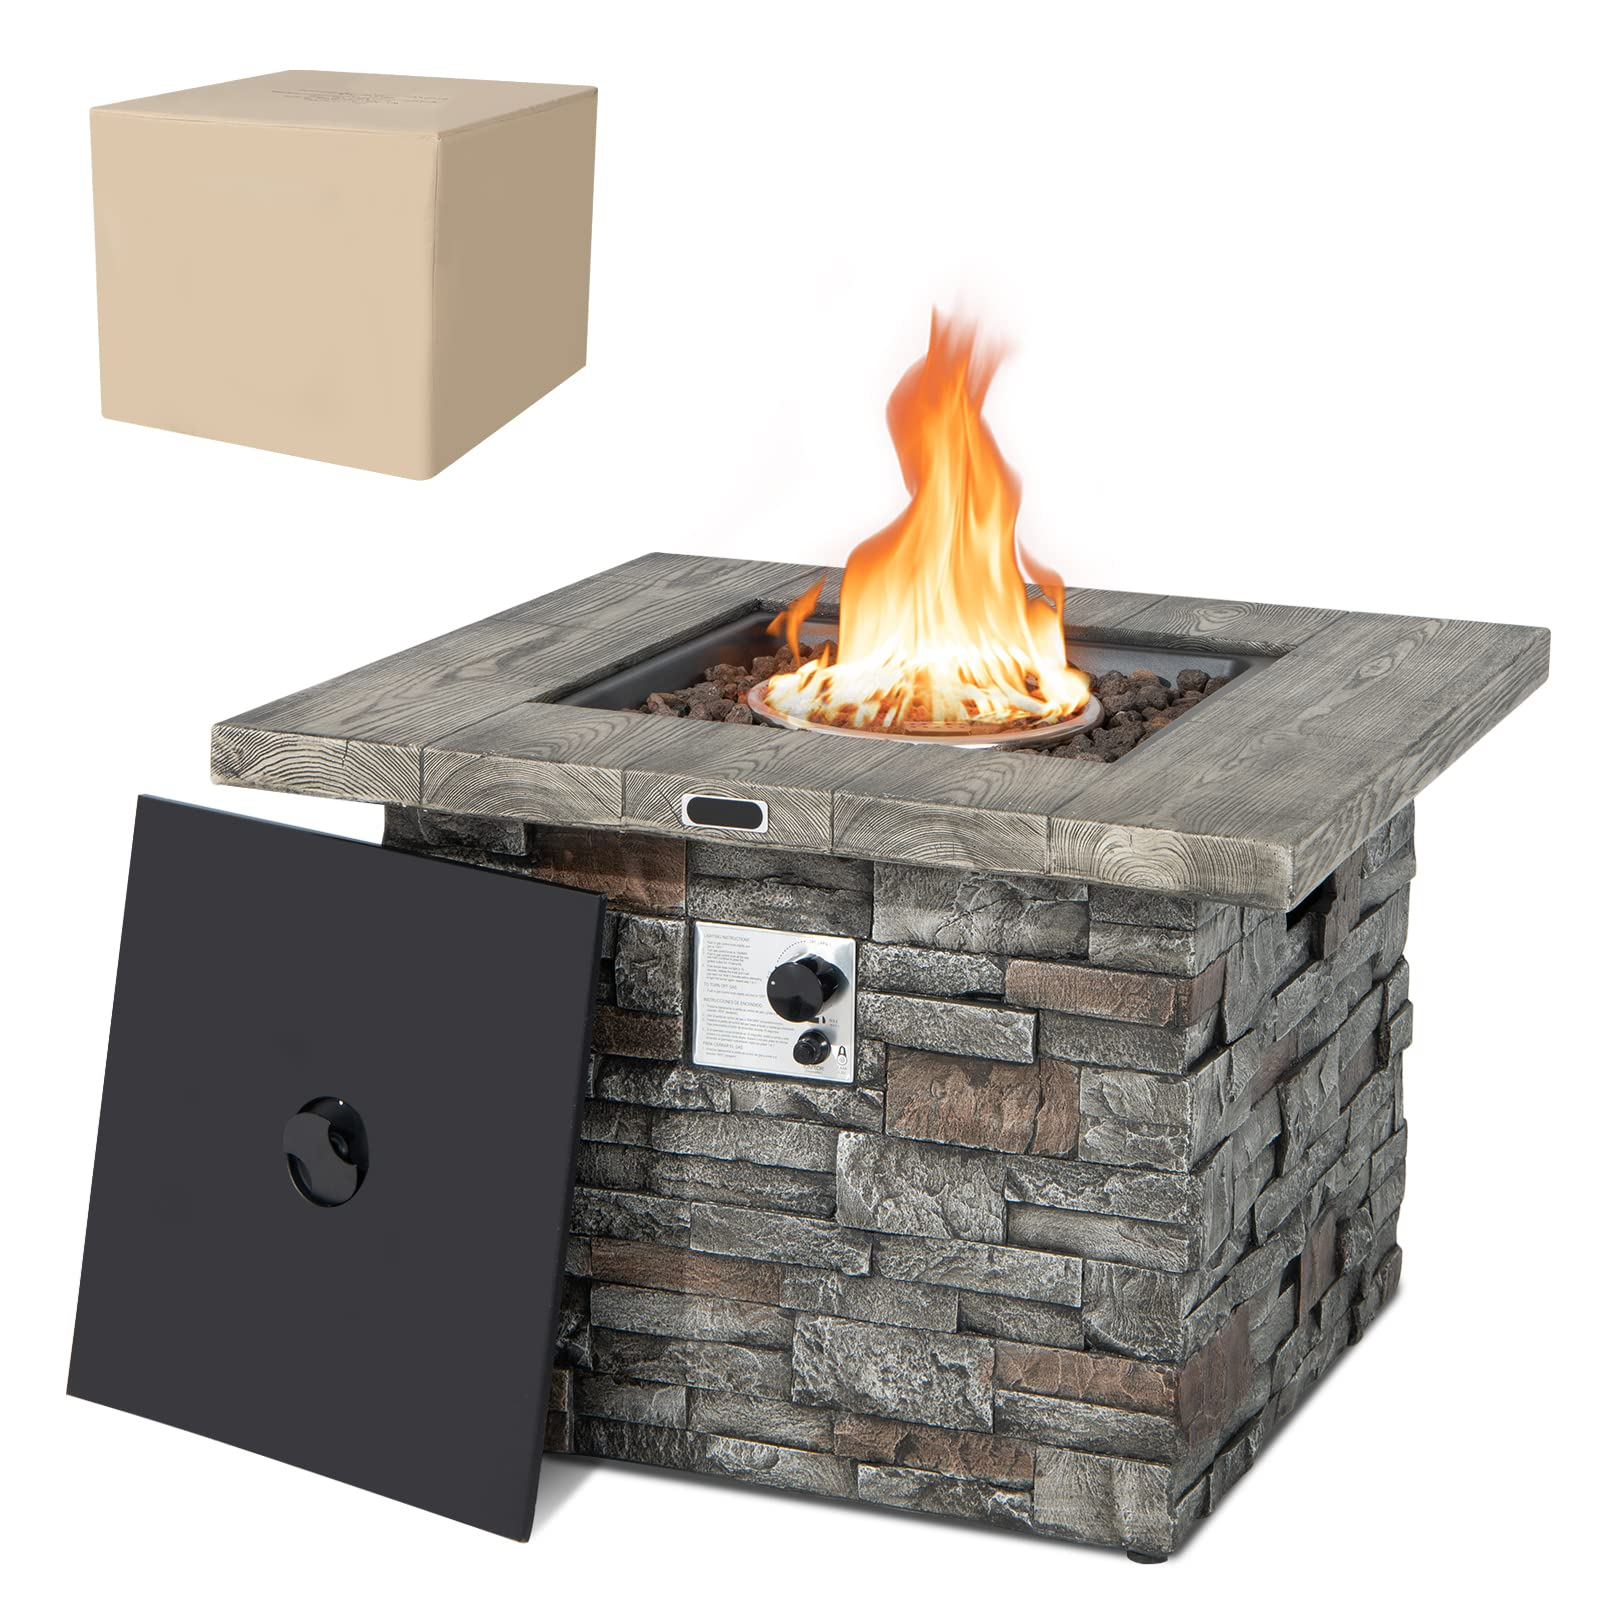 34.5" Propane Gas Fire Pit Table - Patio 2-in-1 Outdoor Square Fire Table W/ Volcanic Rock & PVC Cover